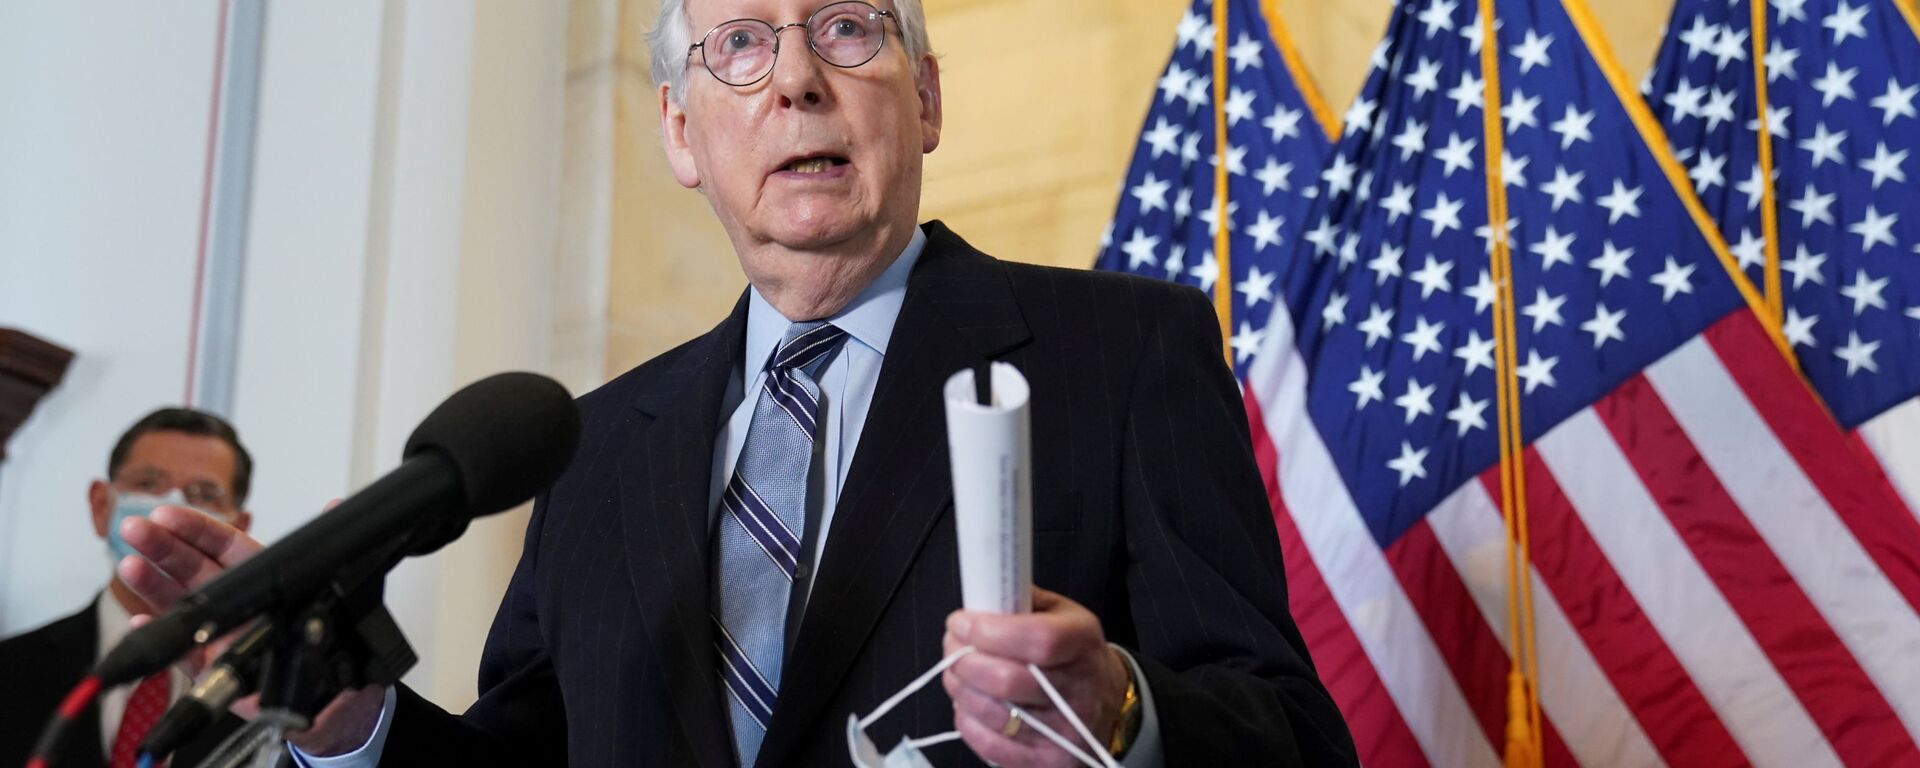 Senate Minority Leader Mitch McConnell speaks to reporters after the Senate Republican lunch on Capitol Hill in Washington, U.S., March 23, 2021 - Sputnik International, 1920, 07.05.2021